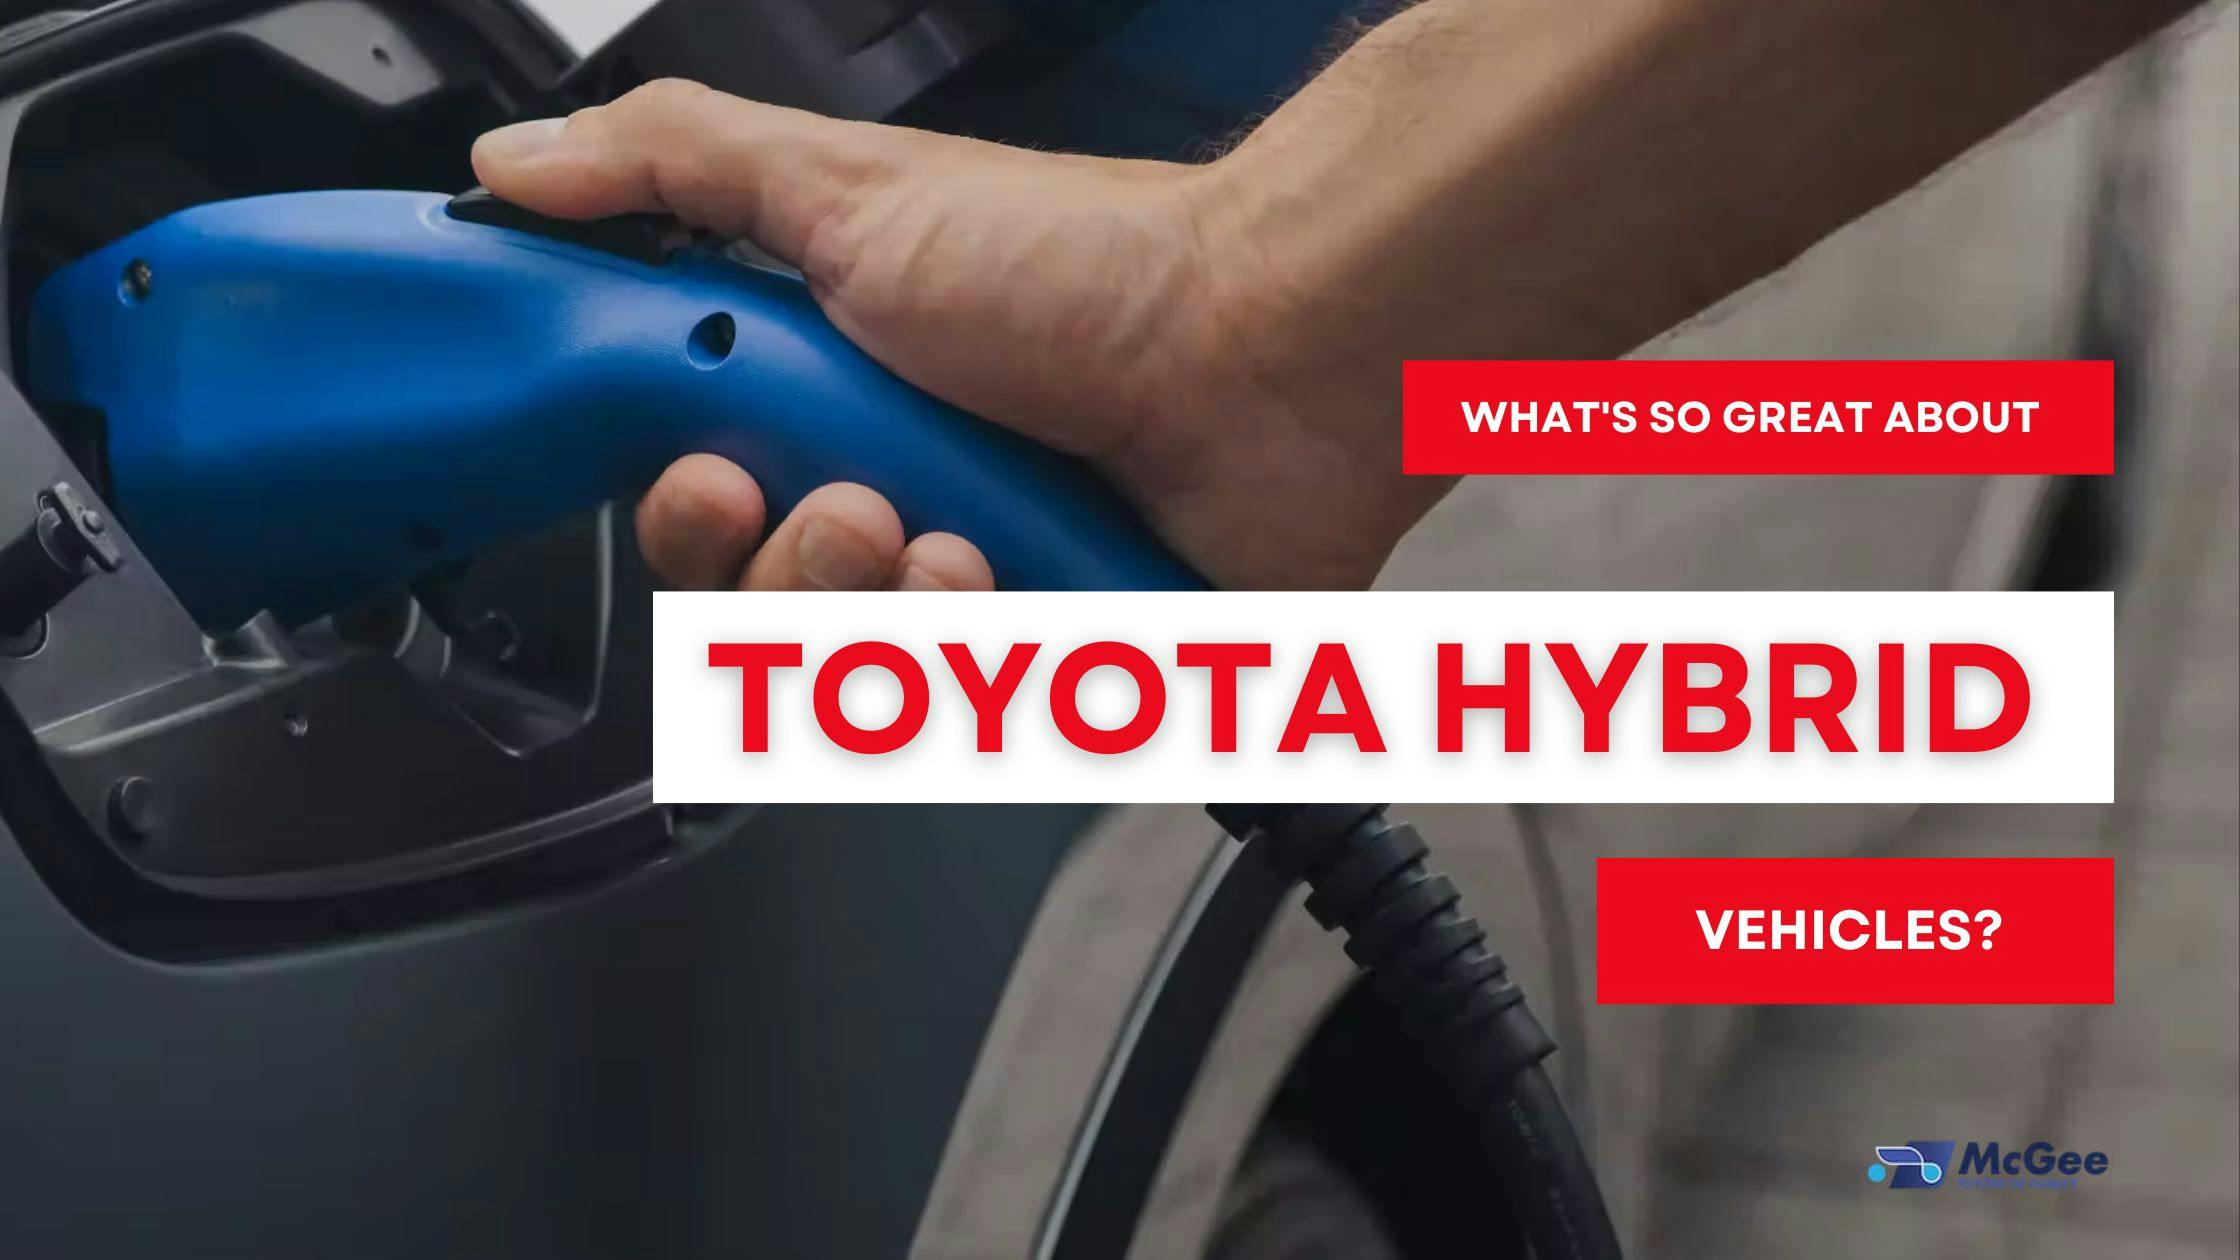 whats so great about toyota hybrid vehicles banner.